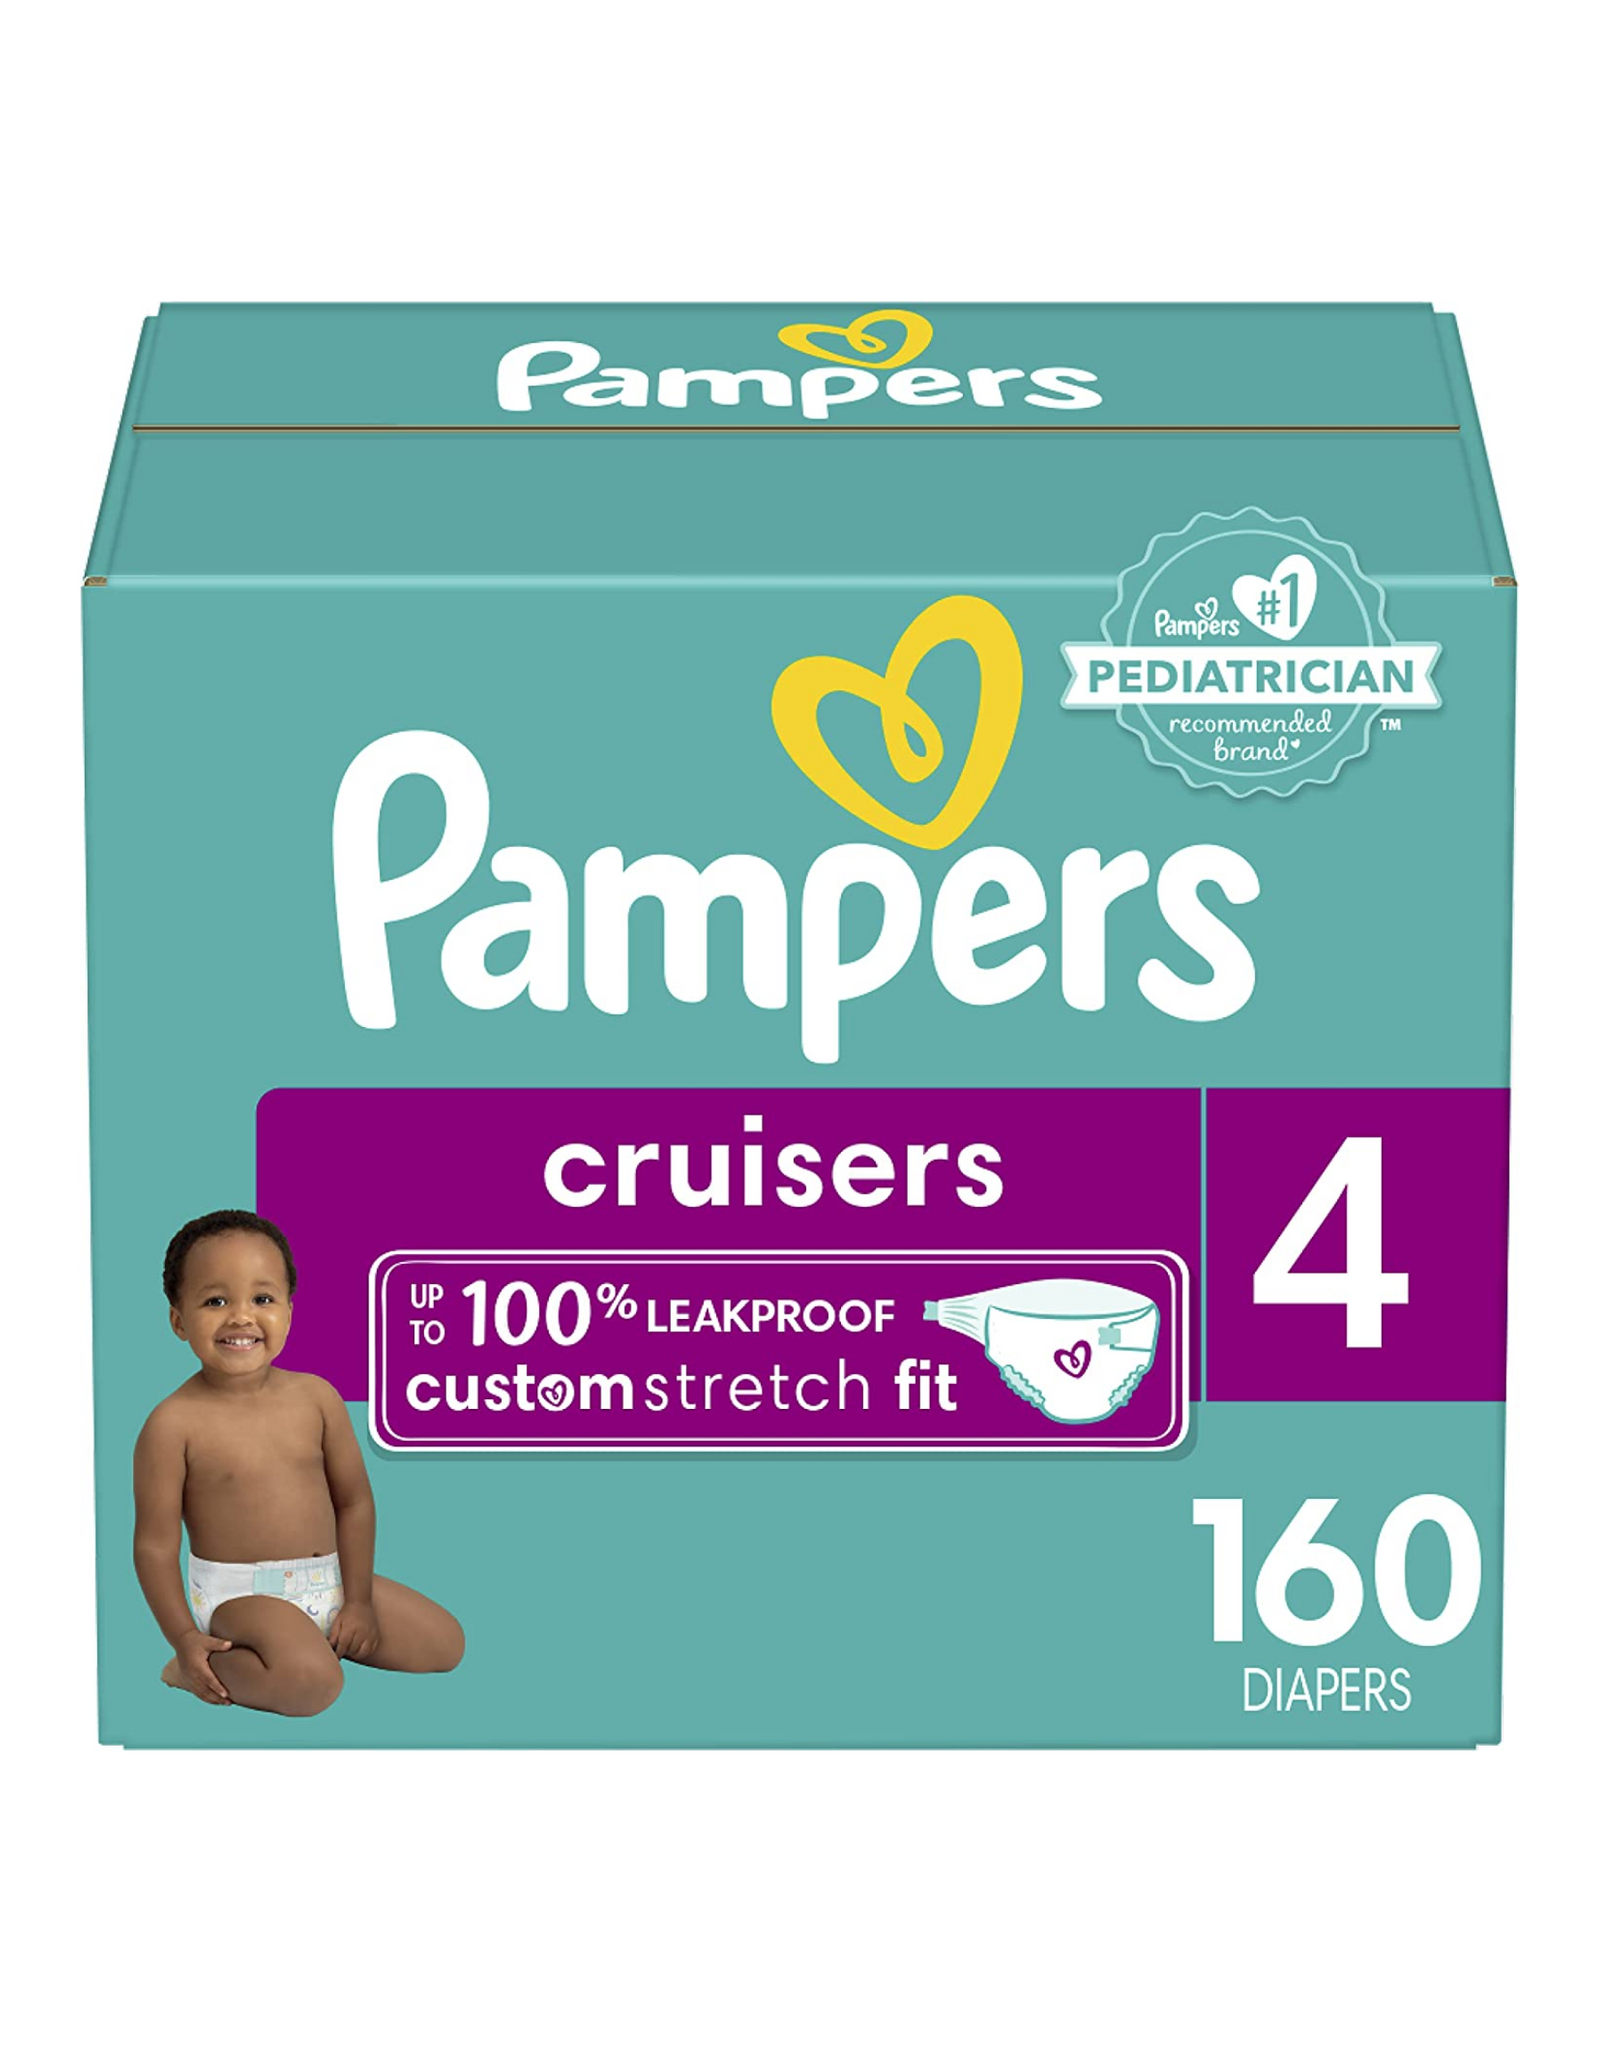 Diapers Size 4, 160 Count - Pampers Cruisers Baby Diapers, Stay-Put Fit (Packaging May Vary)